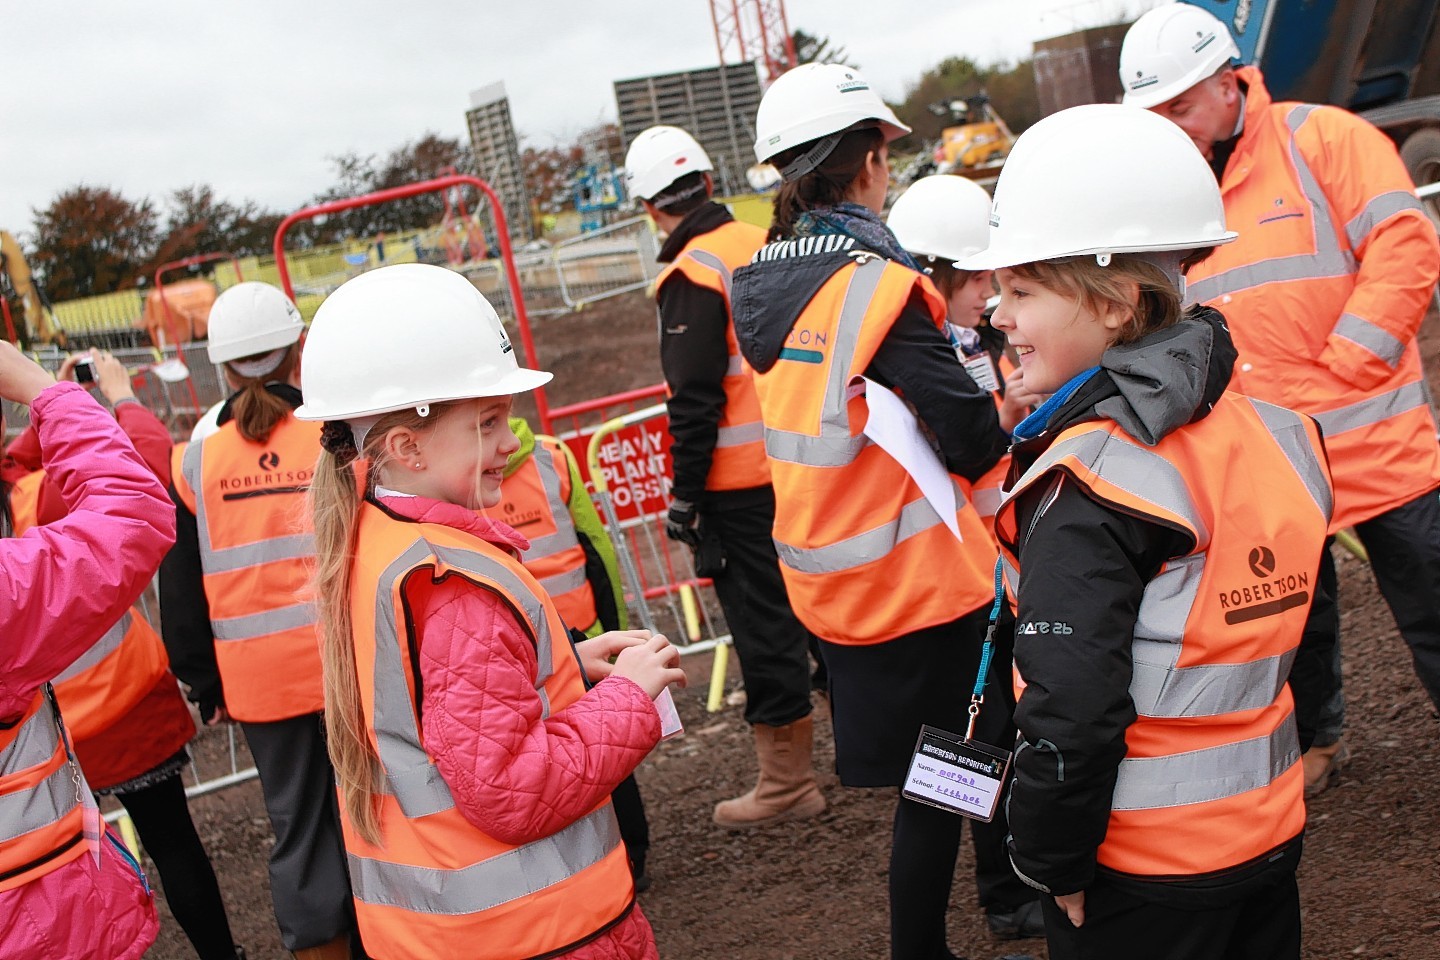 Robertson Group has welcomed thousands of children and young people to classroom talks, workshops and site visits